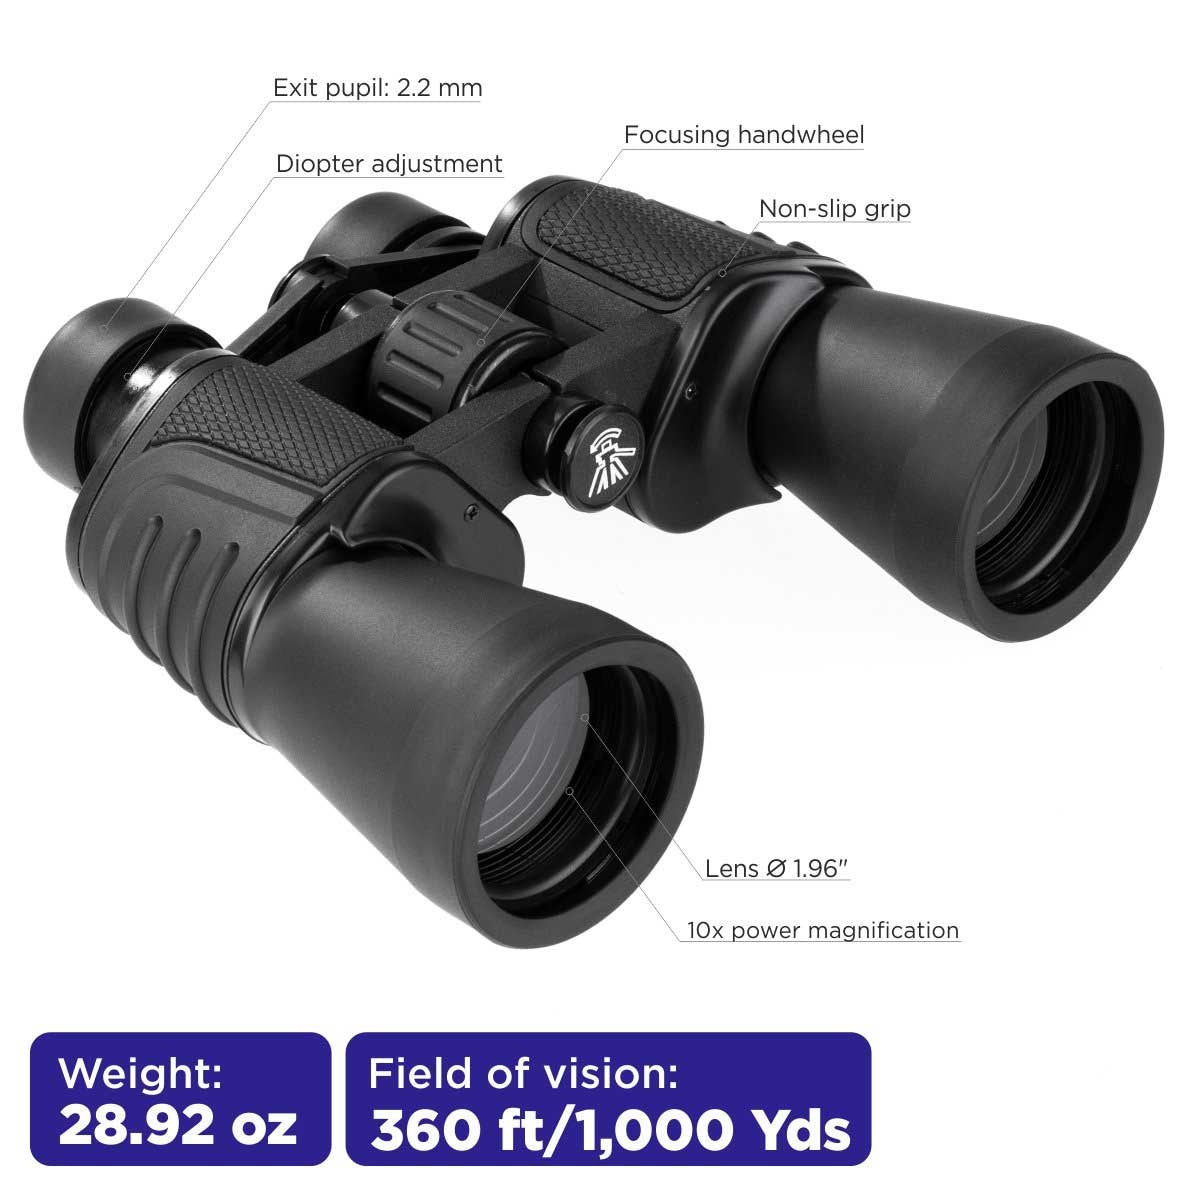 10x50 Multifunctional Camping Black Binocular weighs 29 oz, its field of vosion stands for a thousand yards. The binocular boasts a non-slip grip, focusing handwheel and 10x magnification and 2-inch lens